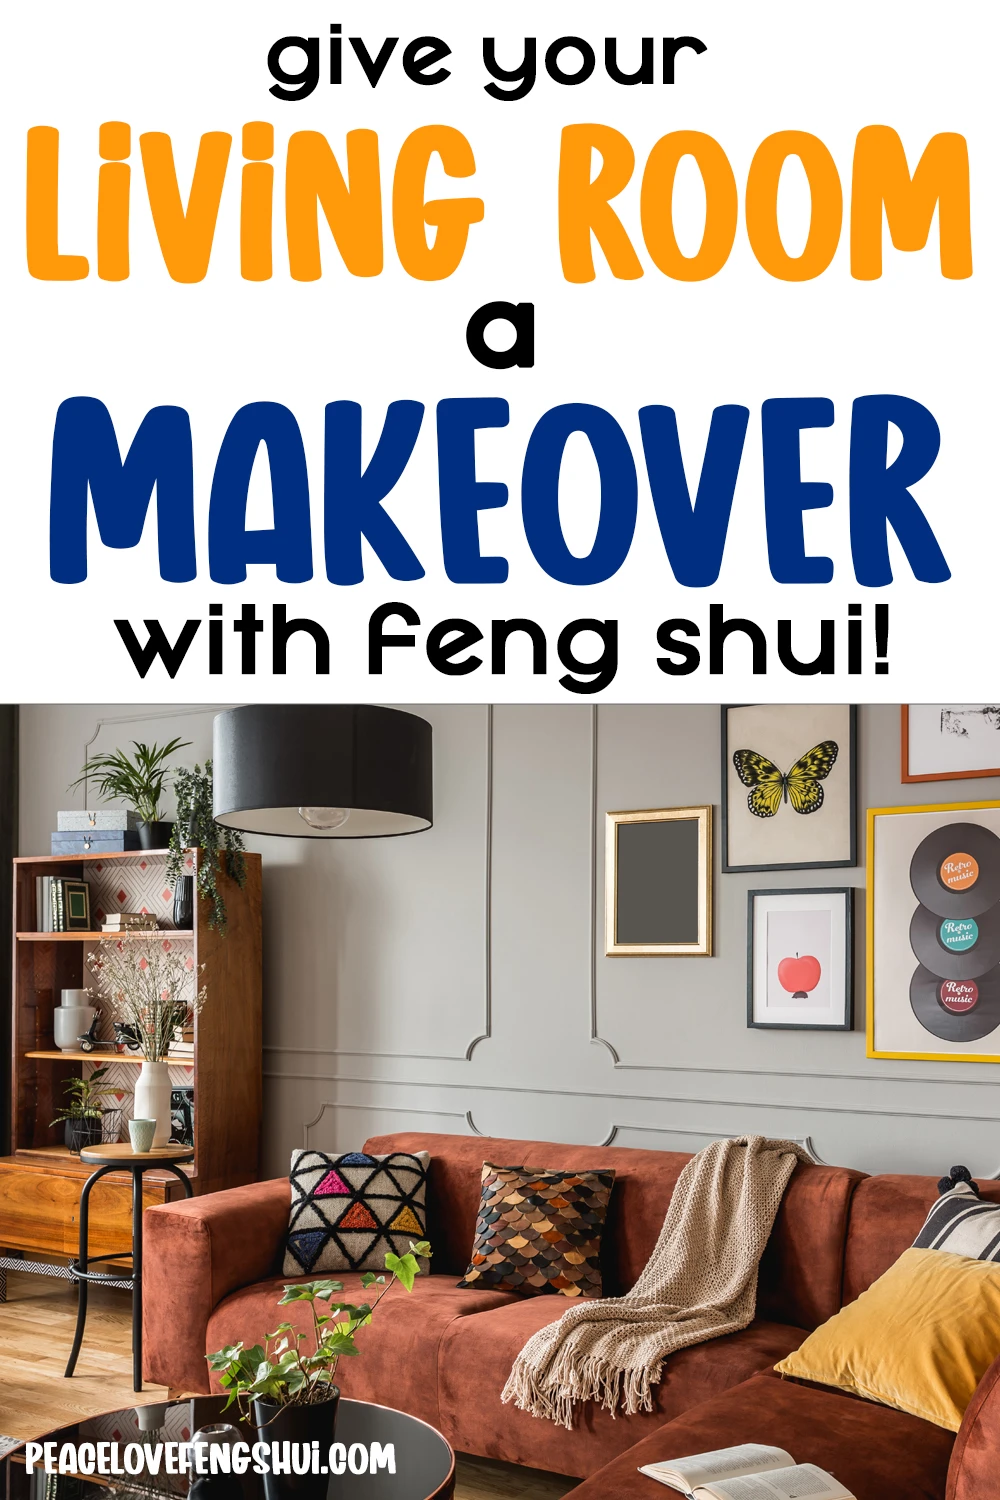 give your living room a makeover with feng shui!